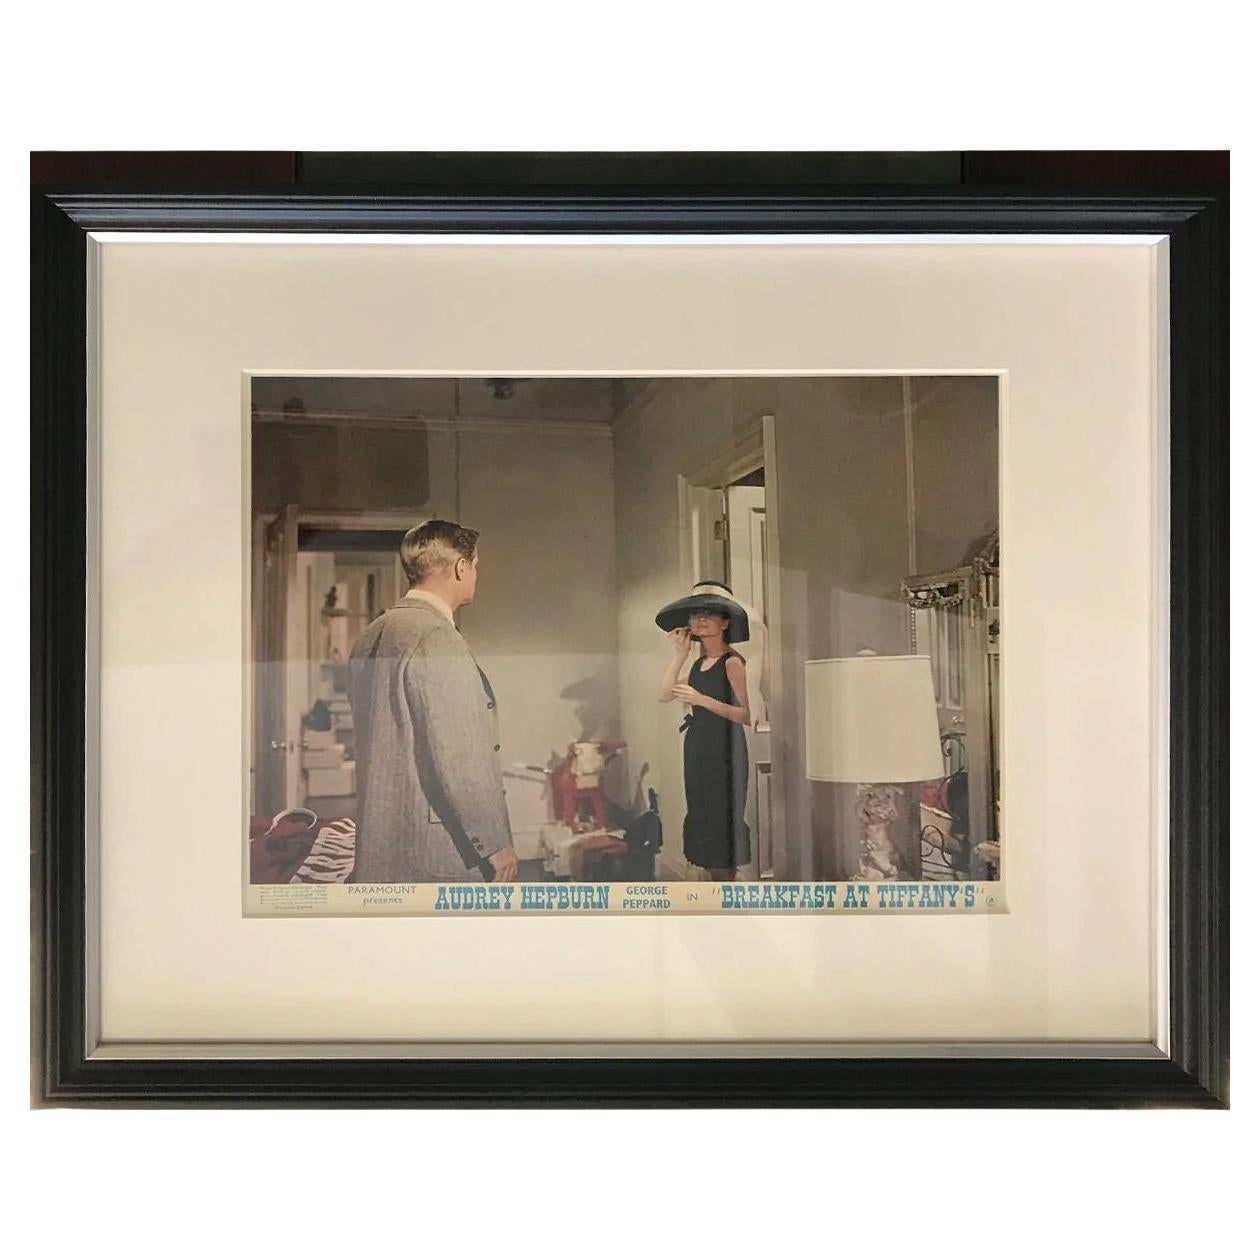 Breakfast at Tiffany's, Framed Poster, 1961 For Sale